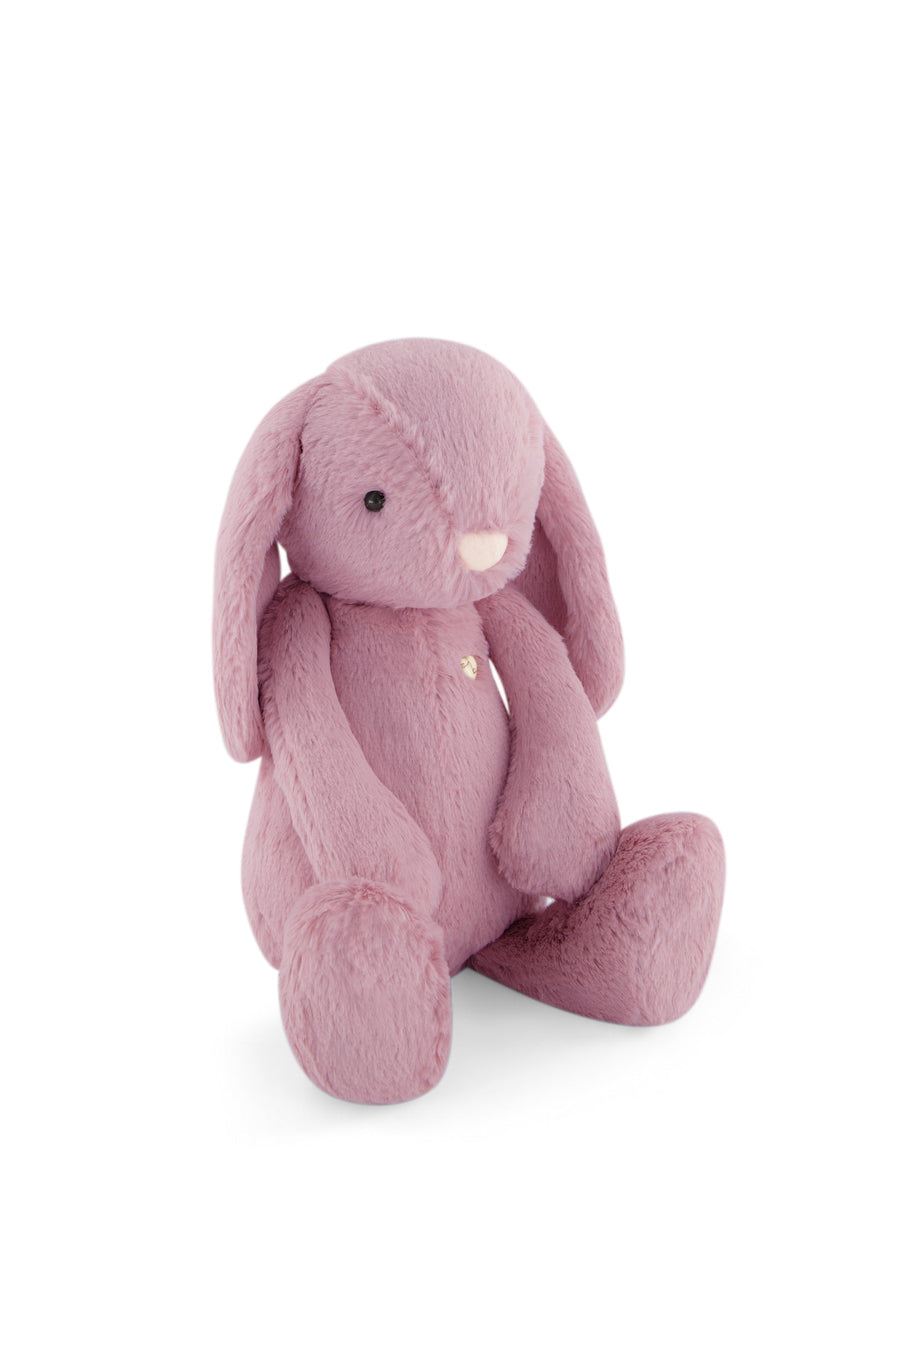 Snuggle Bunnies - Penelope the Bunny - Lilium Childrens Toy from Jamie Kay USA